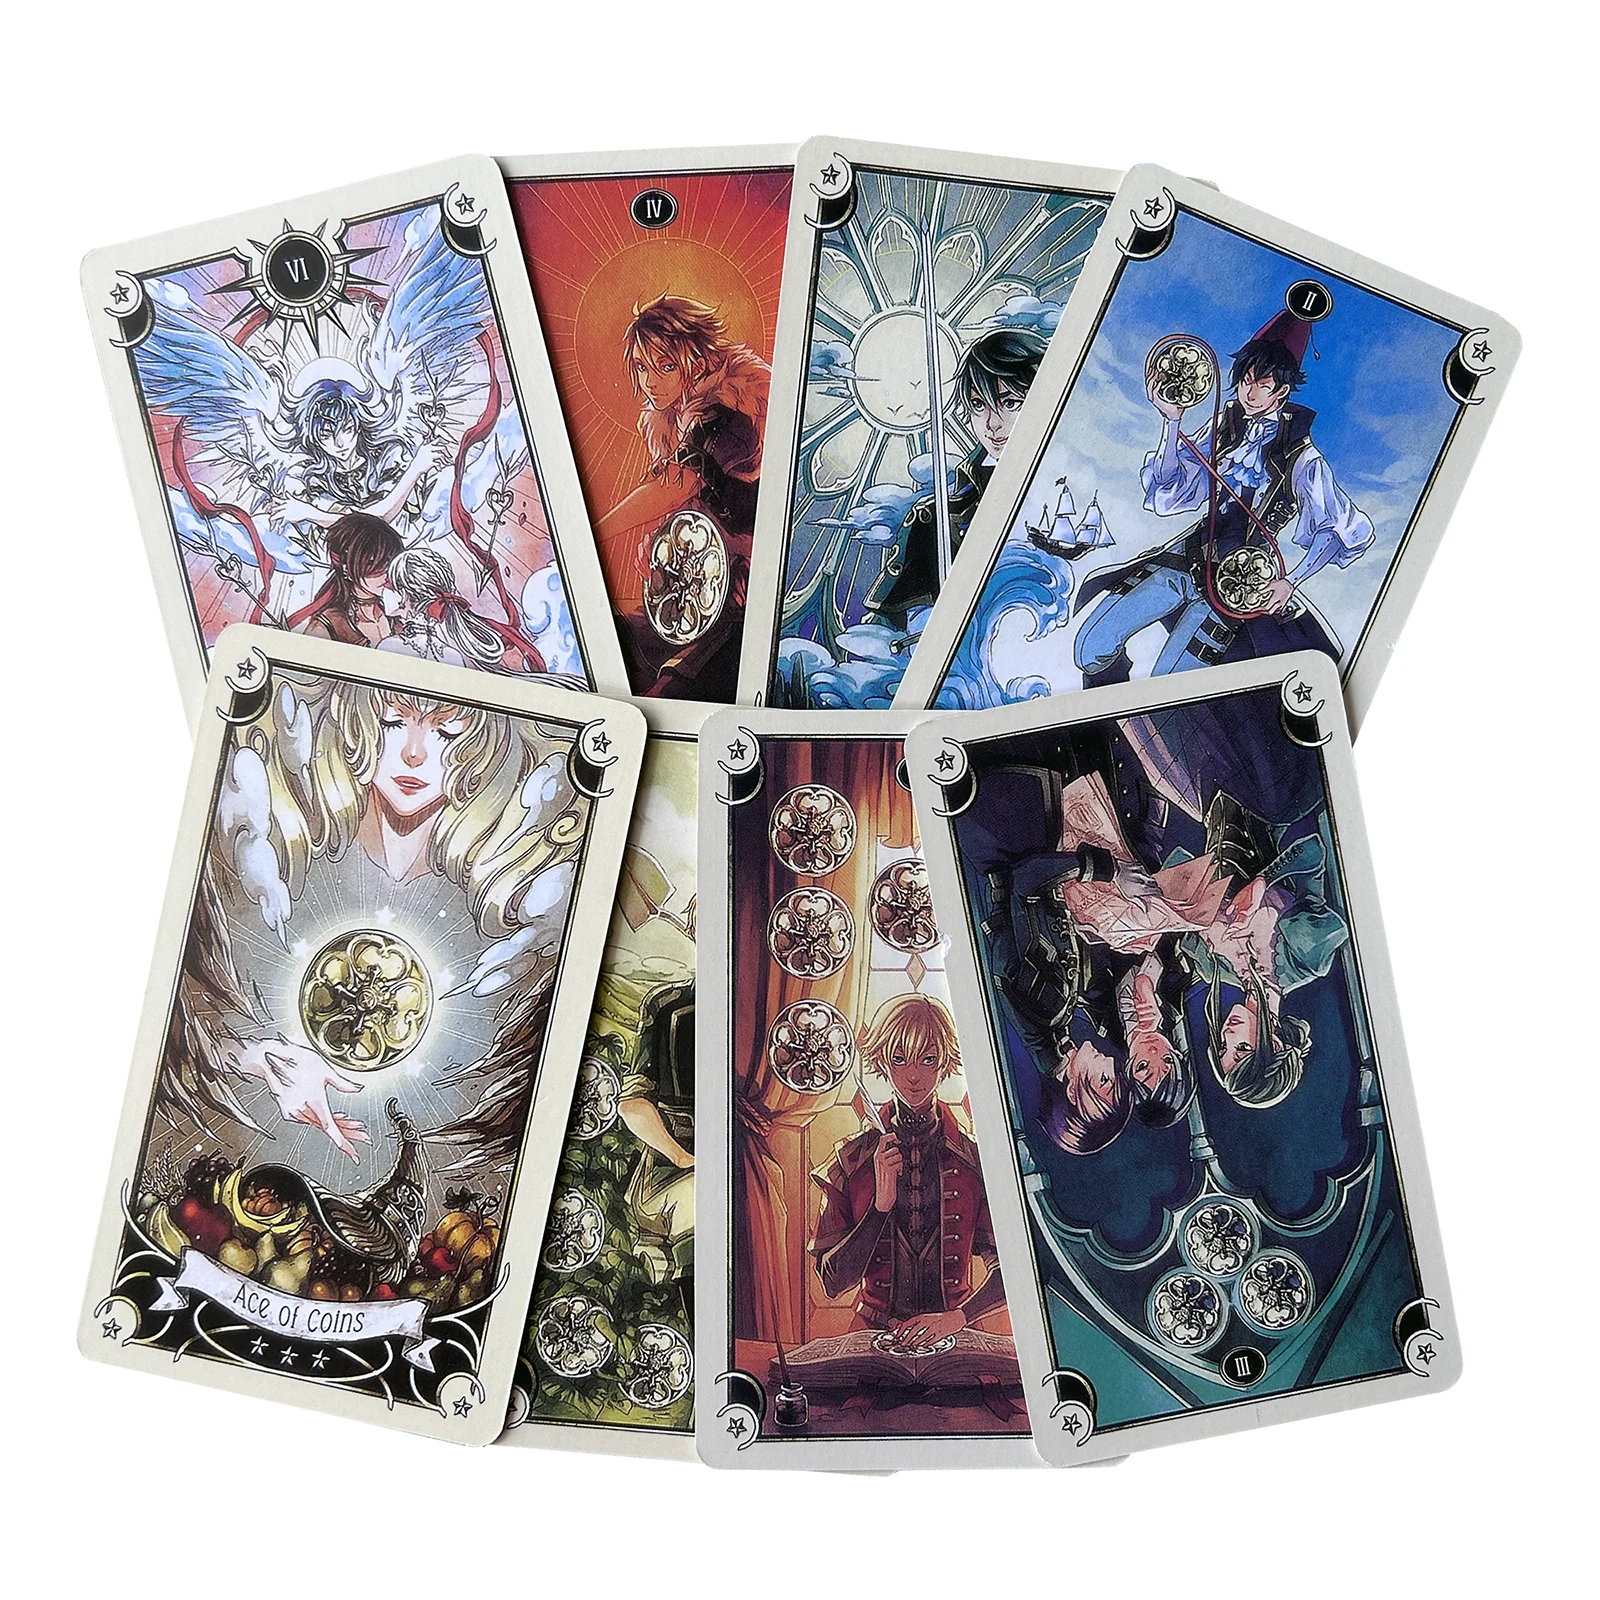 Hot Sell Tarot Cards 12x7 Board Game for Divination Personal Use Tarot Deck Party Games Full English Table Game Outdoor Camping. yo cho bridegroom wedding boutonniere bride wrist corsage men wedding meeting party unique personal adornment artificial flowers